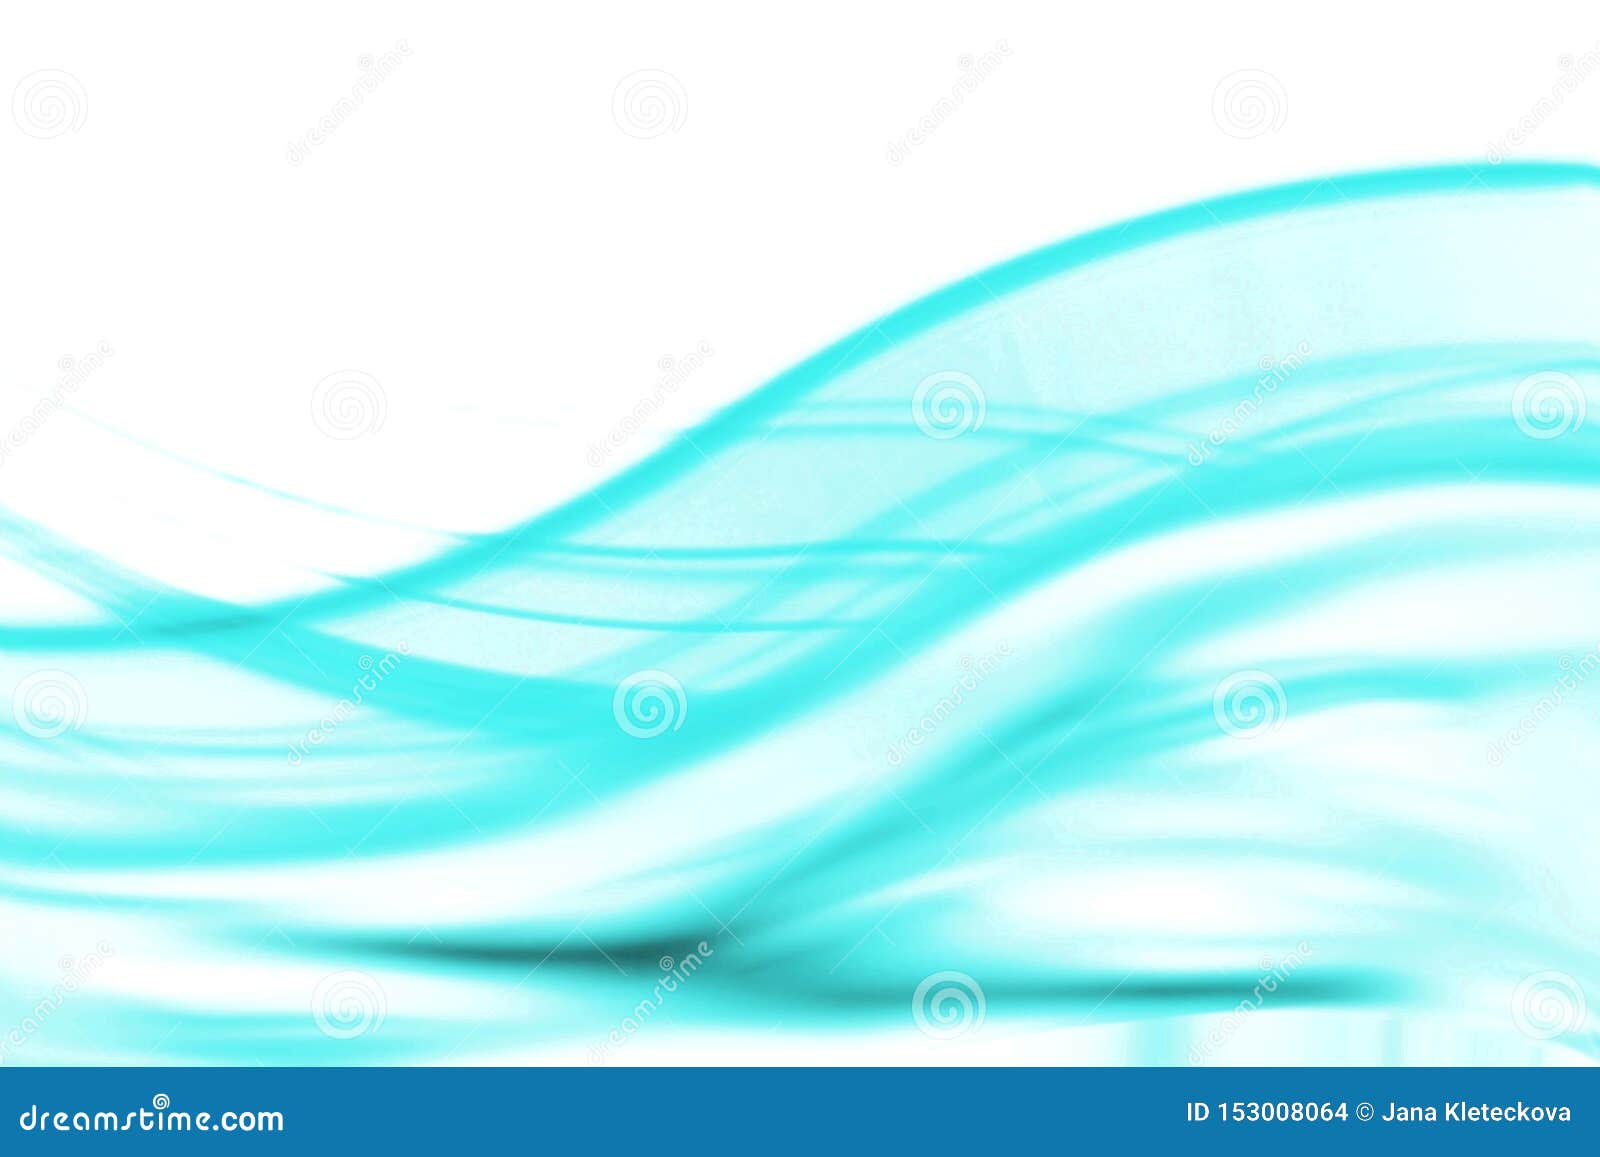 abstract cyan blue wavy cures image background copy space